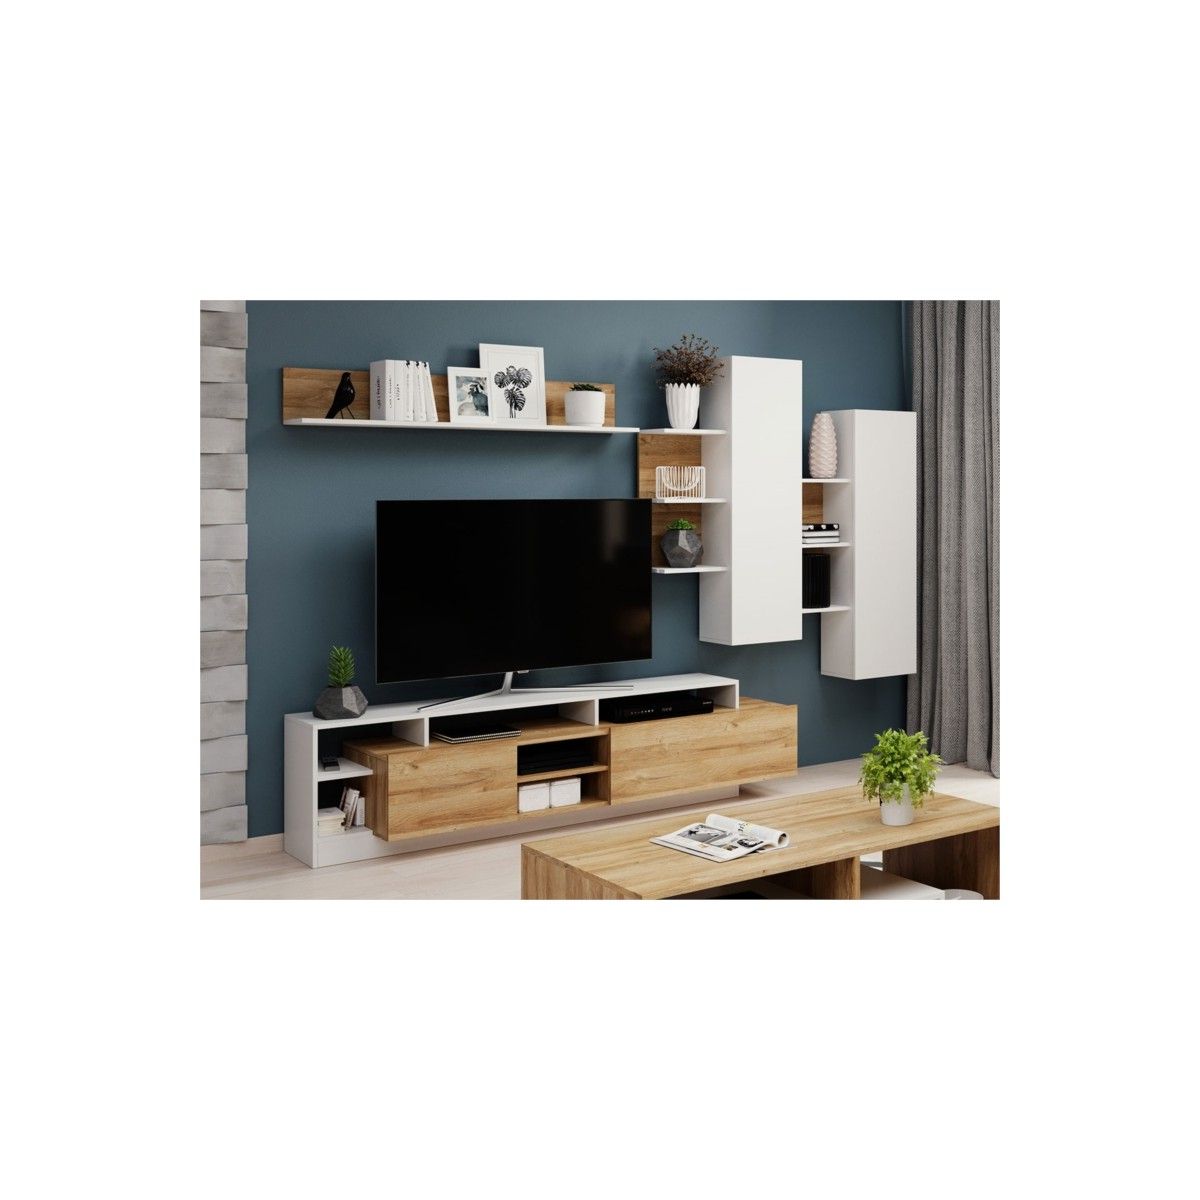 Tv Stand 2 Doors With Shelf And Wall Columns Alba (white, Wood) Pertaining To Cafe Tv Stands With Storage (View 5 of 20)